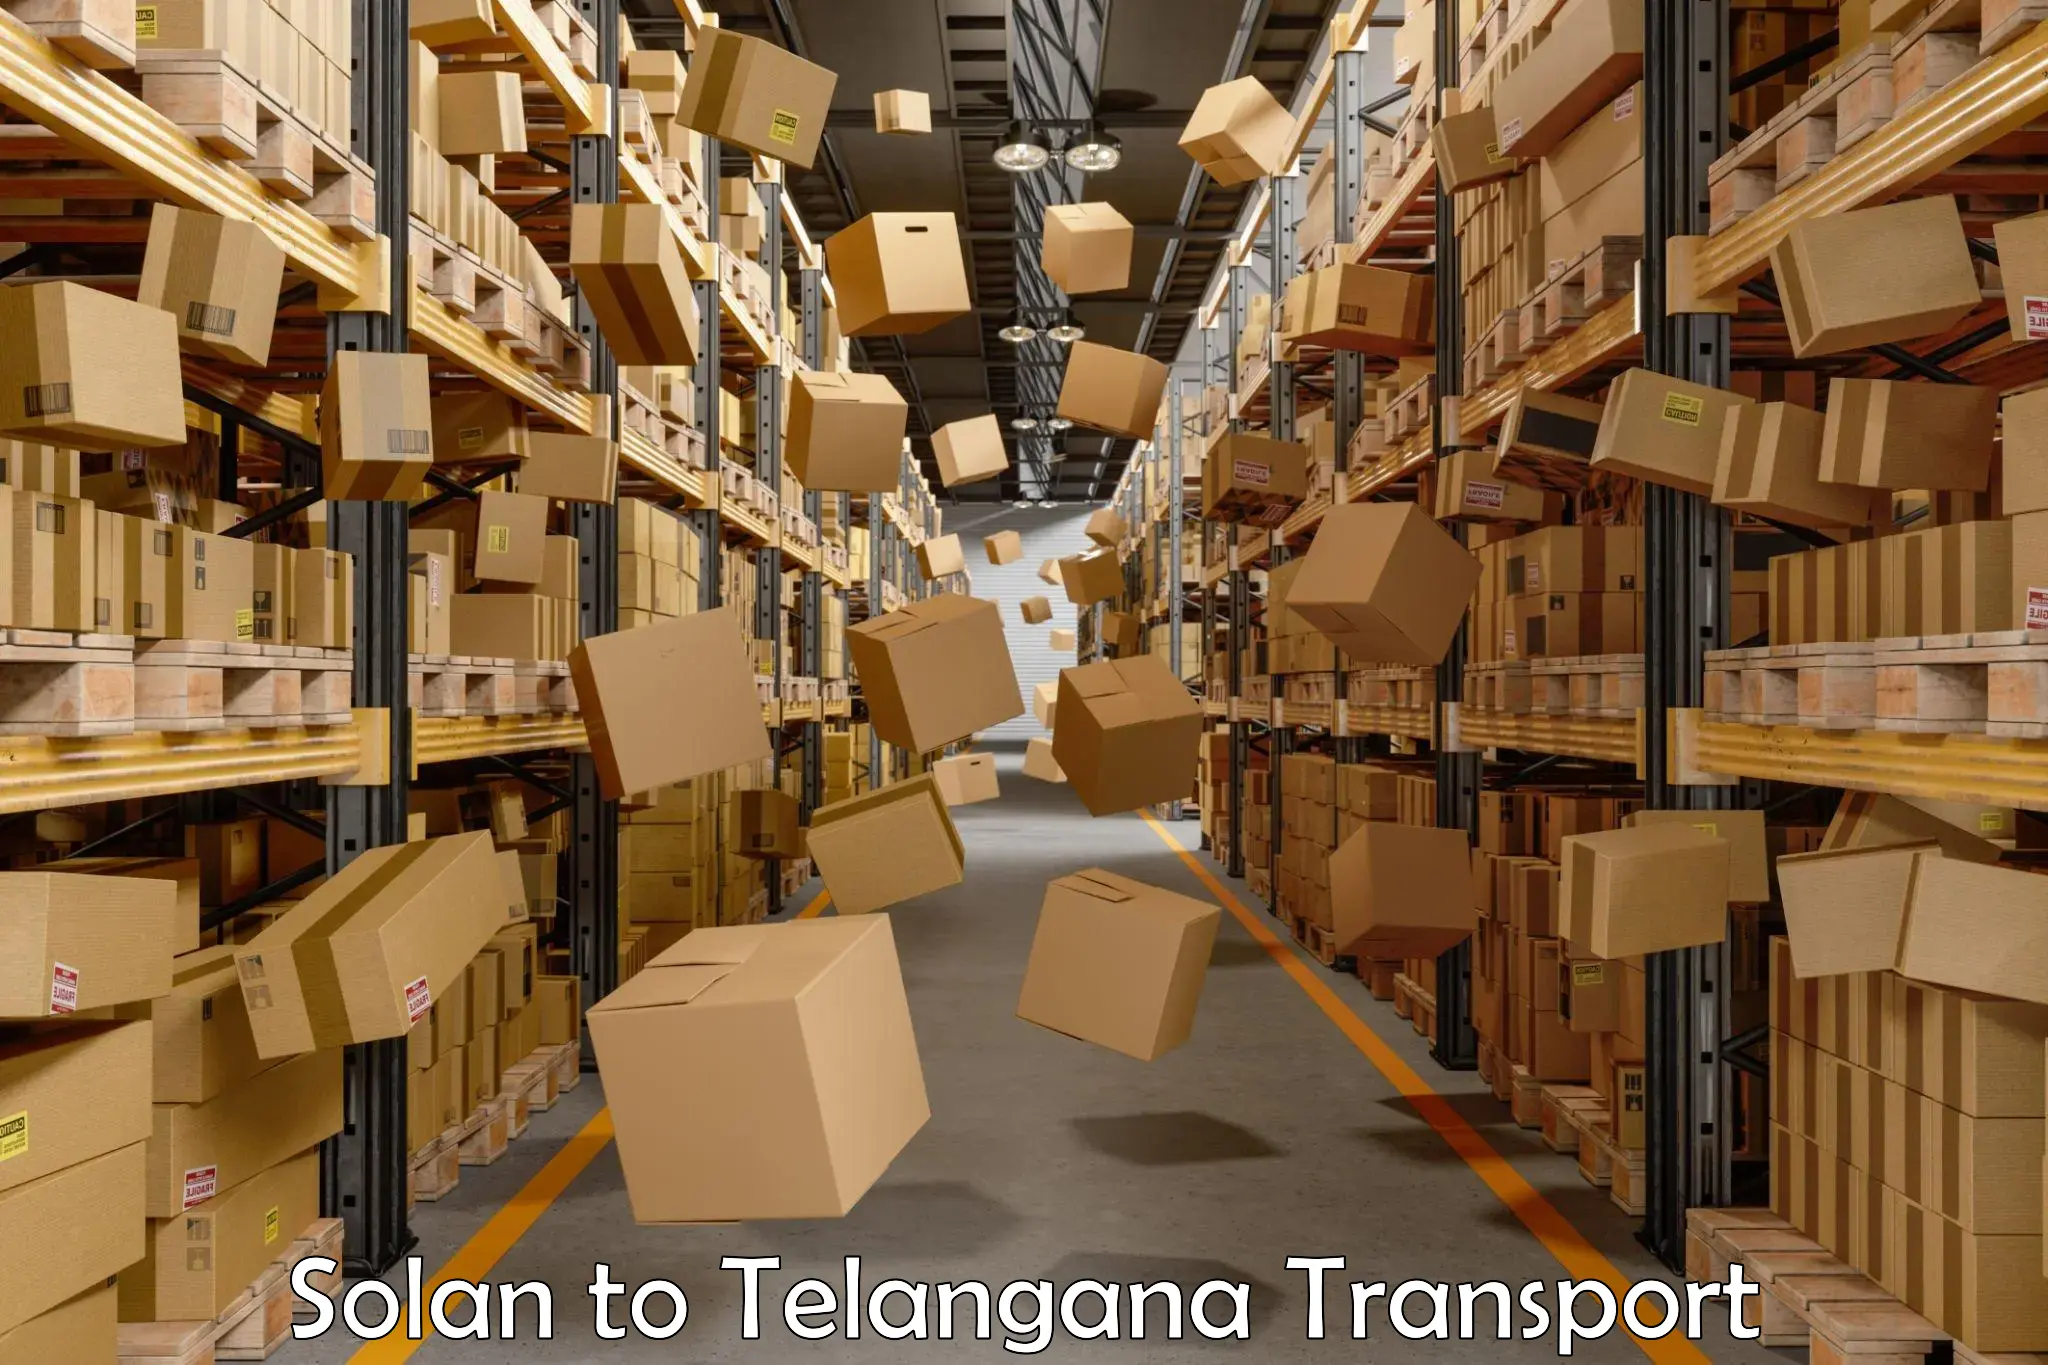 Commercial transport service Solan to Telangana